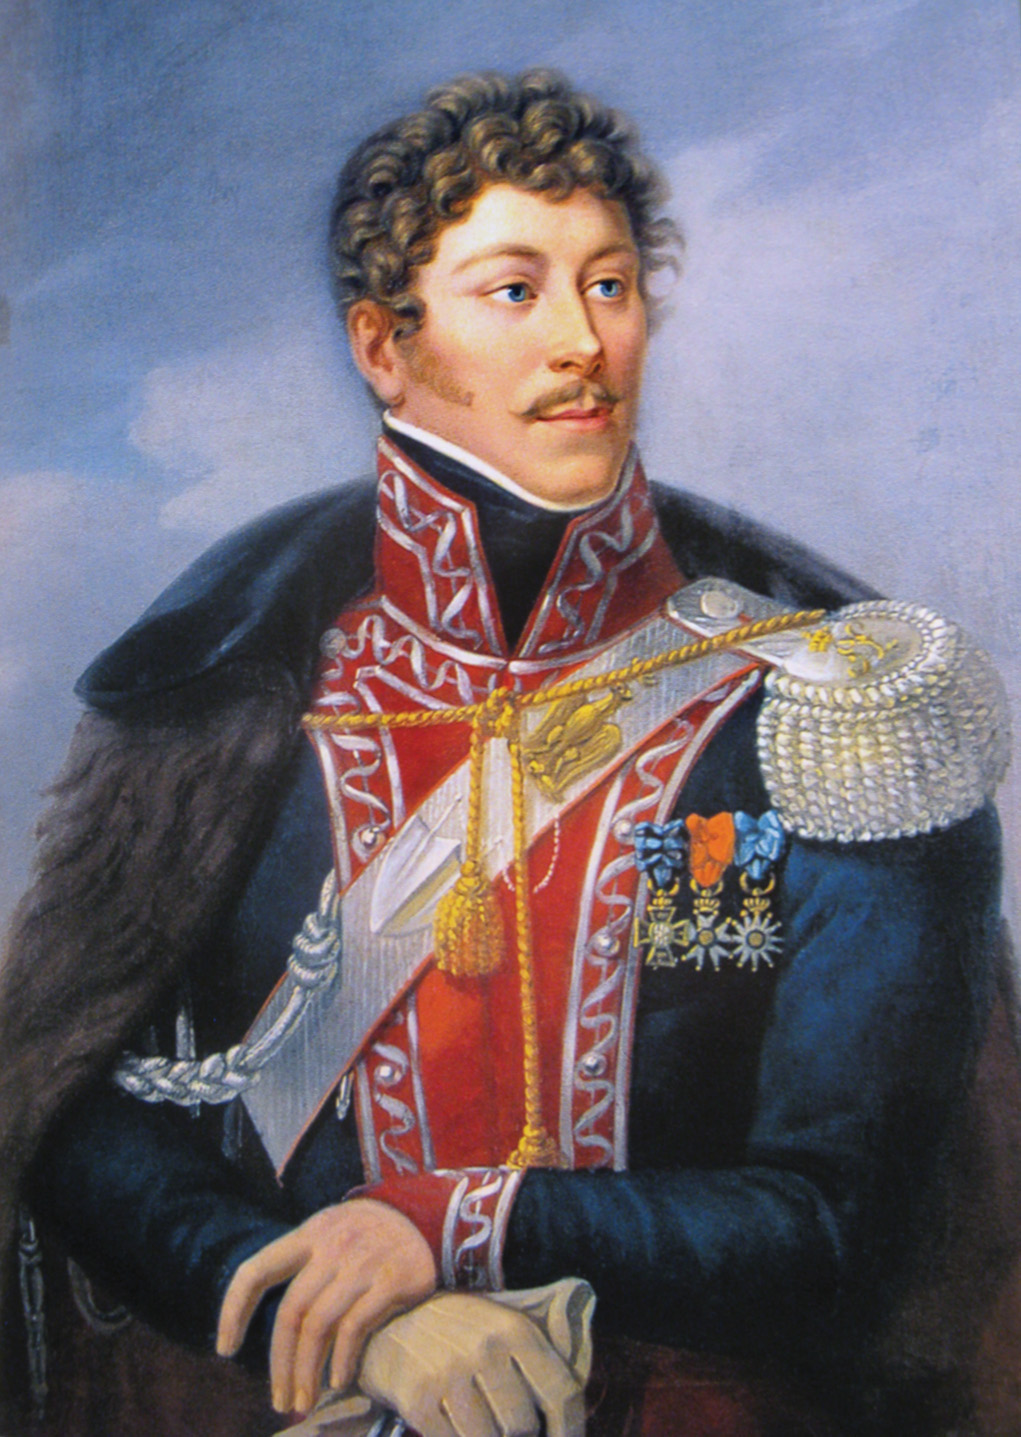 Baron Jan Kozietulski became the most famous commander of the Polish Light Cavalry.